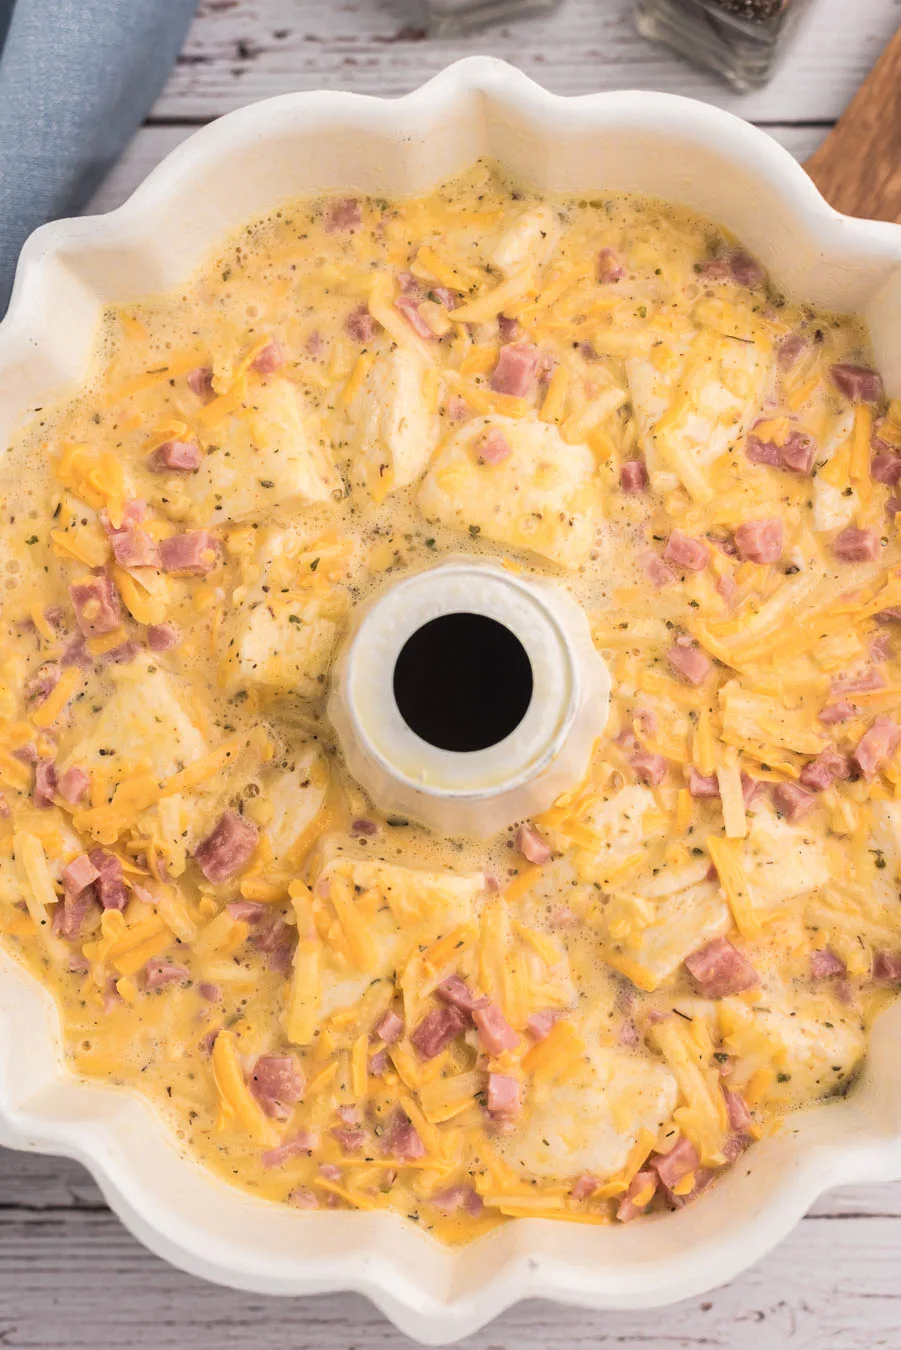 egg casserole mixture added to a bundt pan to prepare for cooking. ham bits, shredded cheese and biscuit chunks